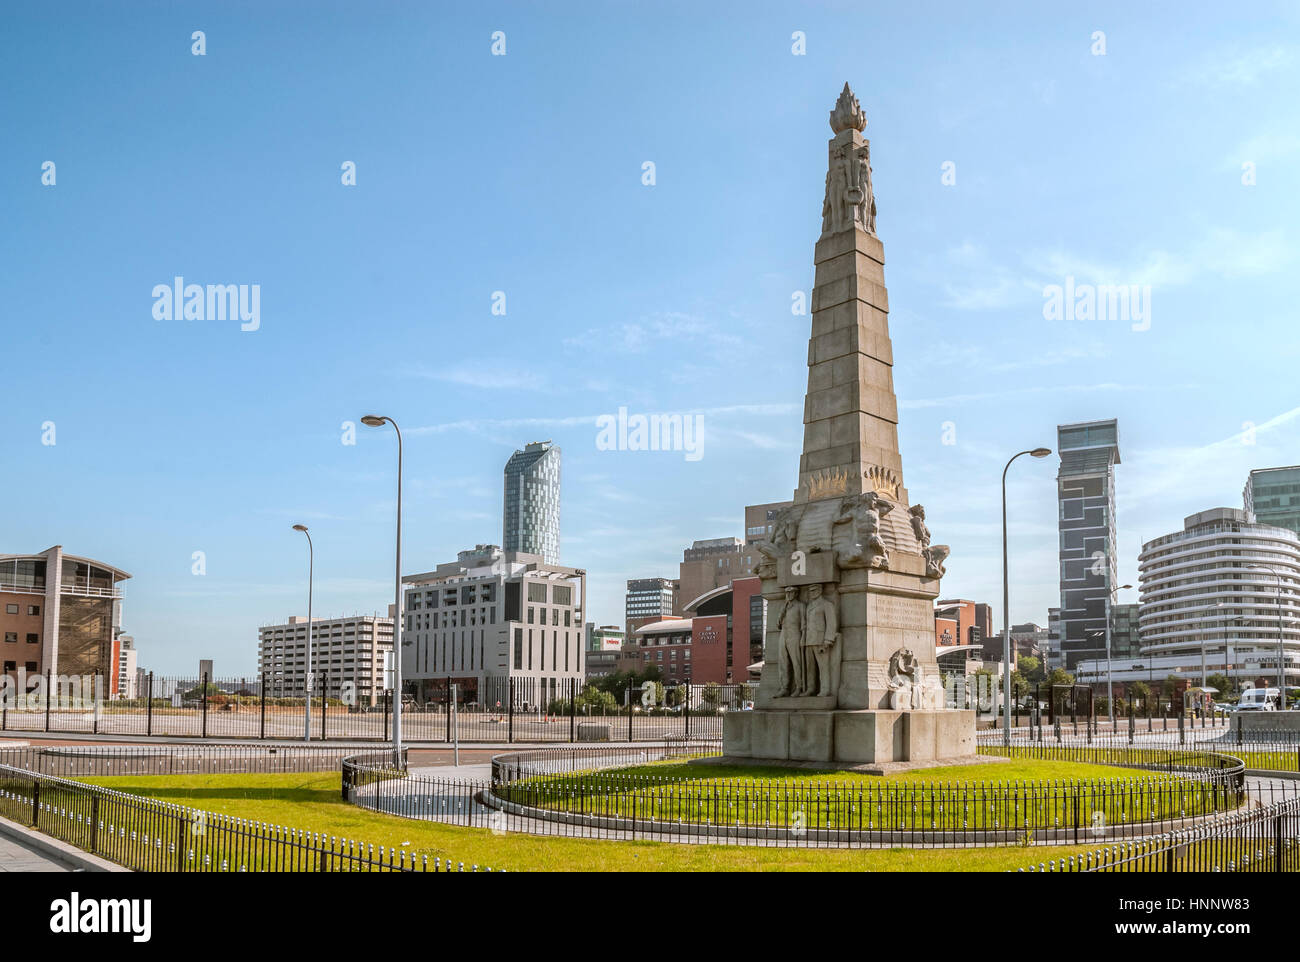 Memorial to the Engine Room Heroes of the Titanic on St. Nicholas Place, at the Pier Head, Liverpool, England Stock Photo